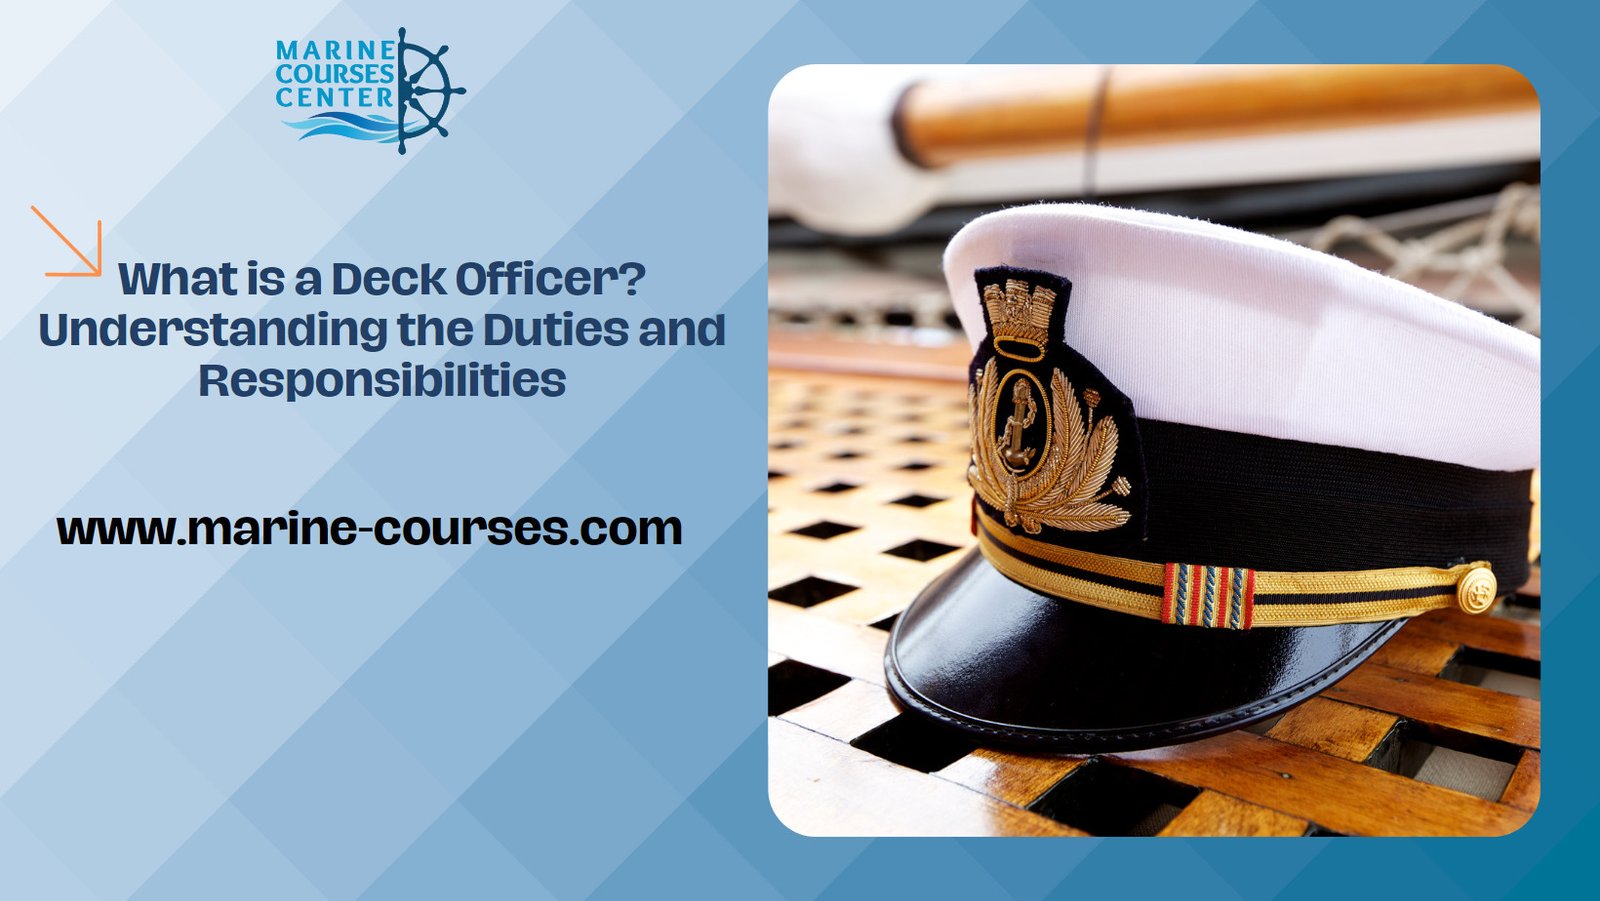 What is a Deck Officer? Understanding the Duties and Responsibilities